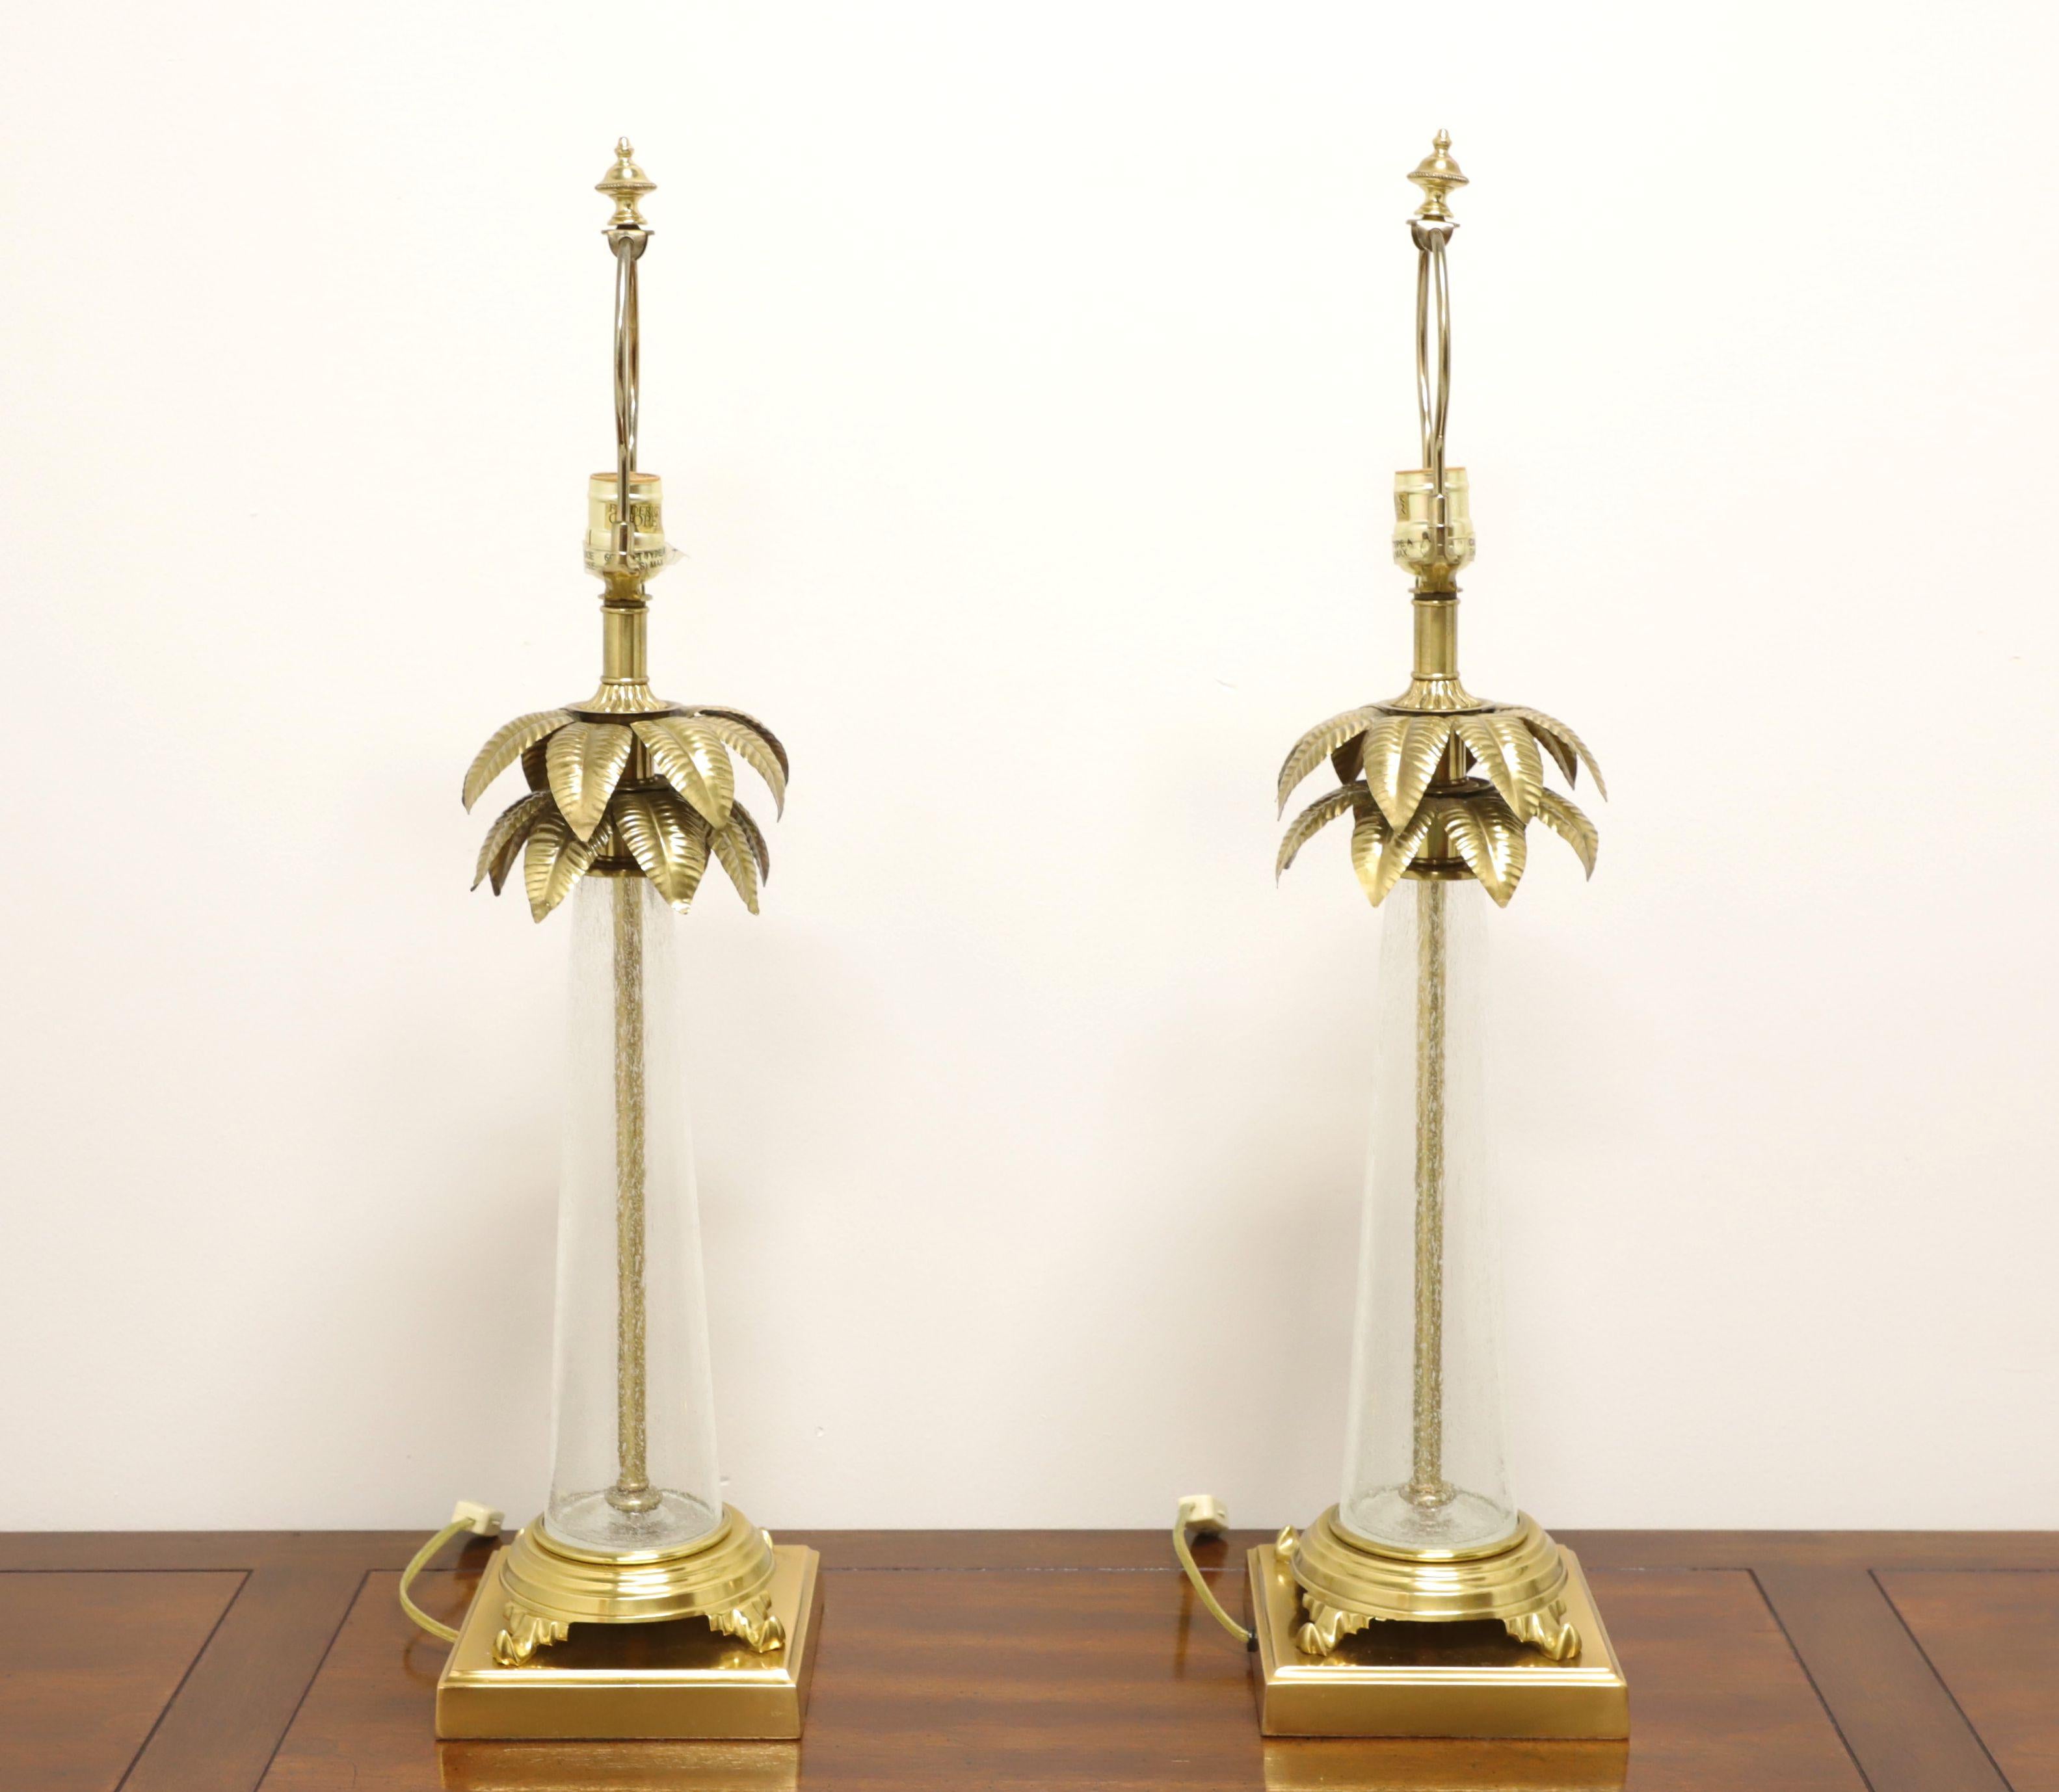 A pair of Hollywood Regency style table lamps by Frederick Cooper. Made of solid brass with a bubble glass surround in the shape of a tree trunk with brass palm fronds at lamp neck. Has metal harp and brass finial. Single standard bulb socket and